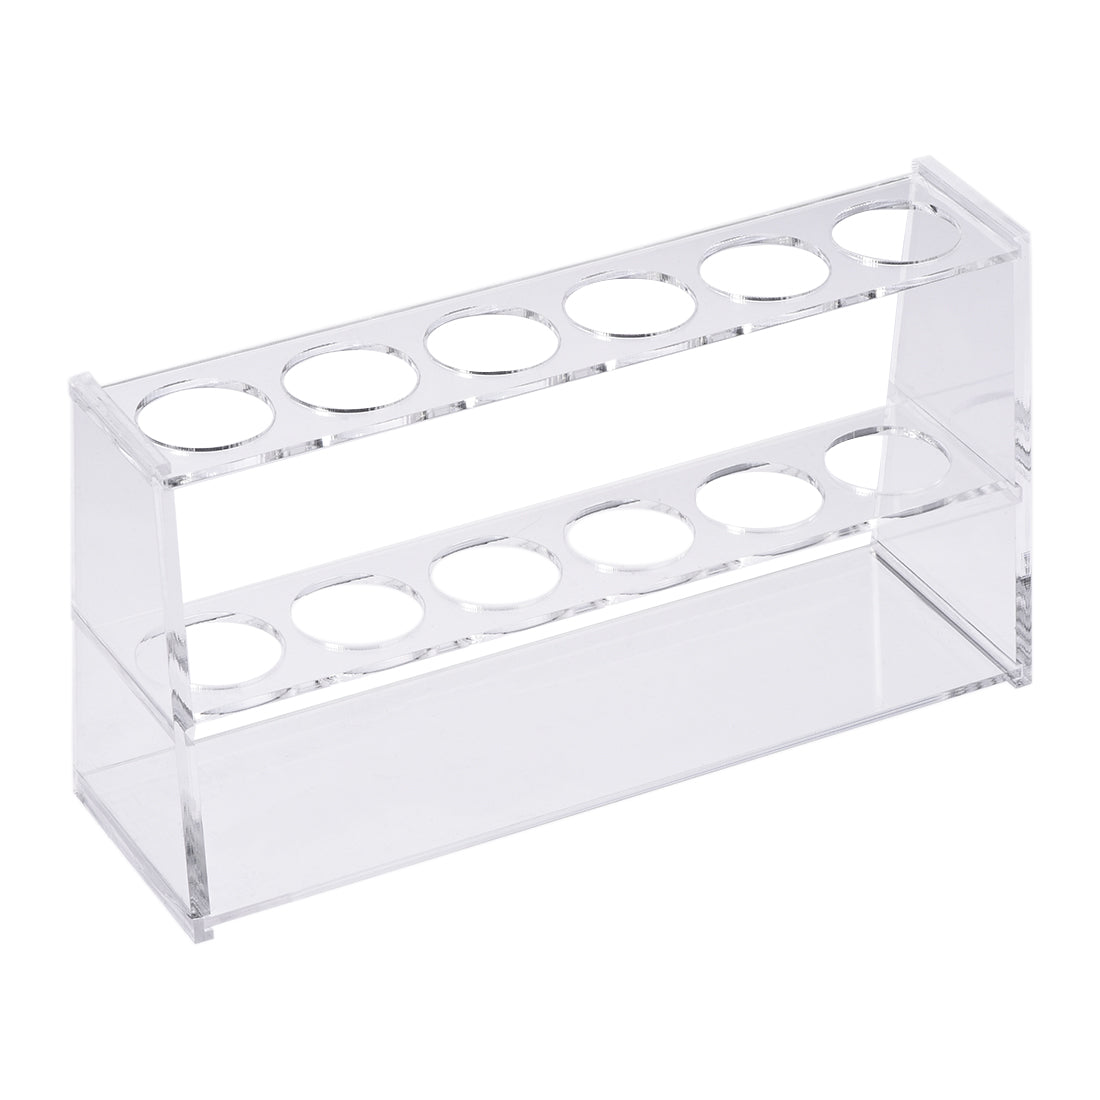 uxcell Uxcell Acrylic Test Tube Holder Rack 6 Wells for 100ml Centrifuge Tubes Clear